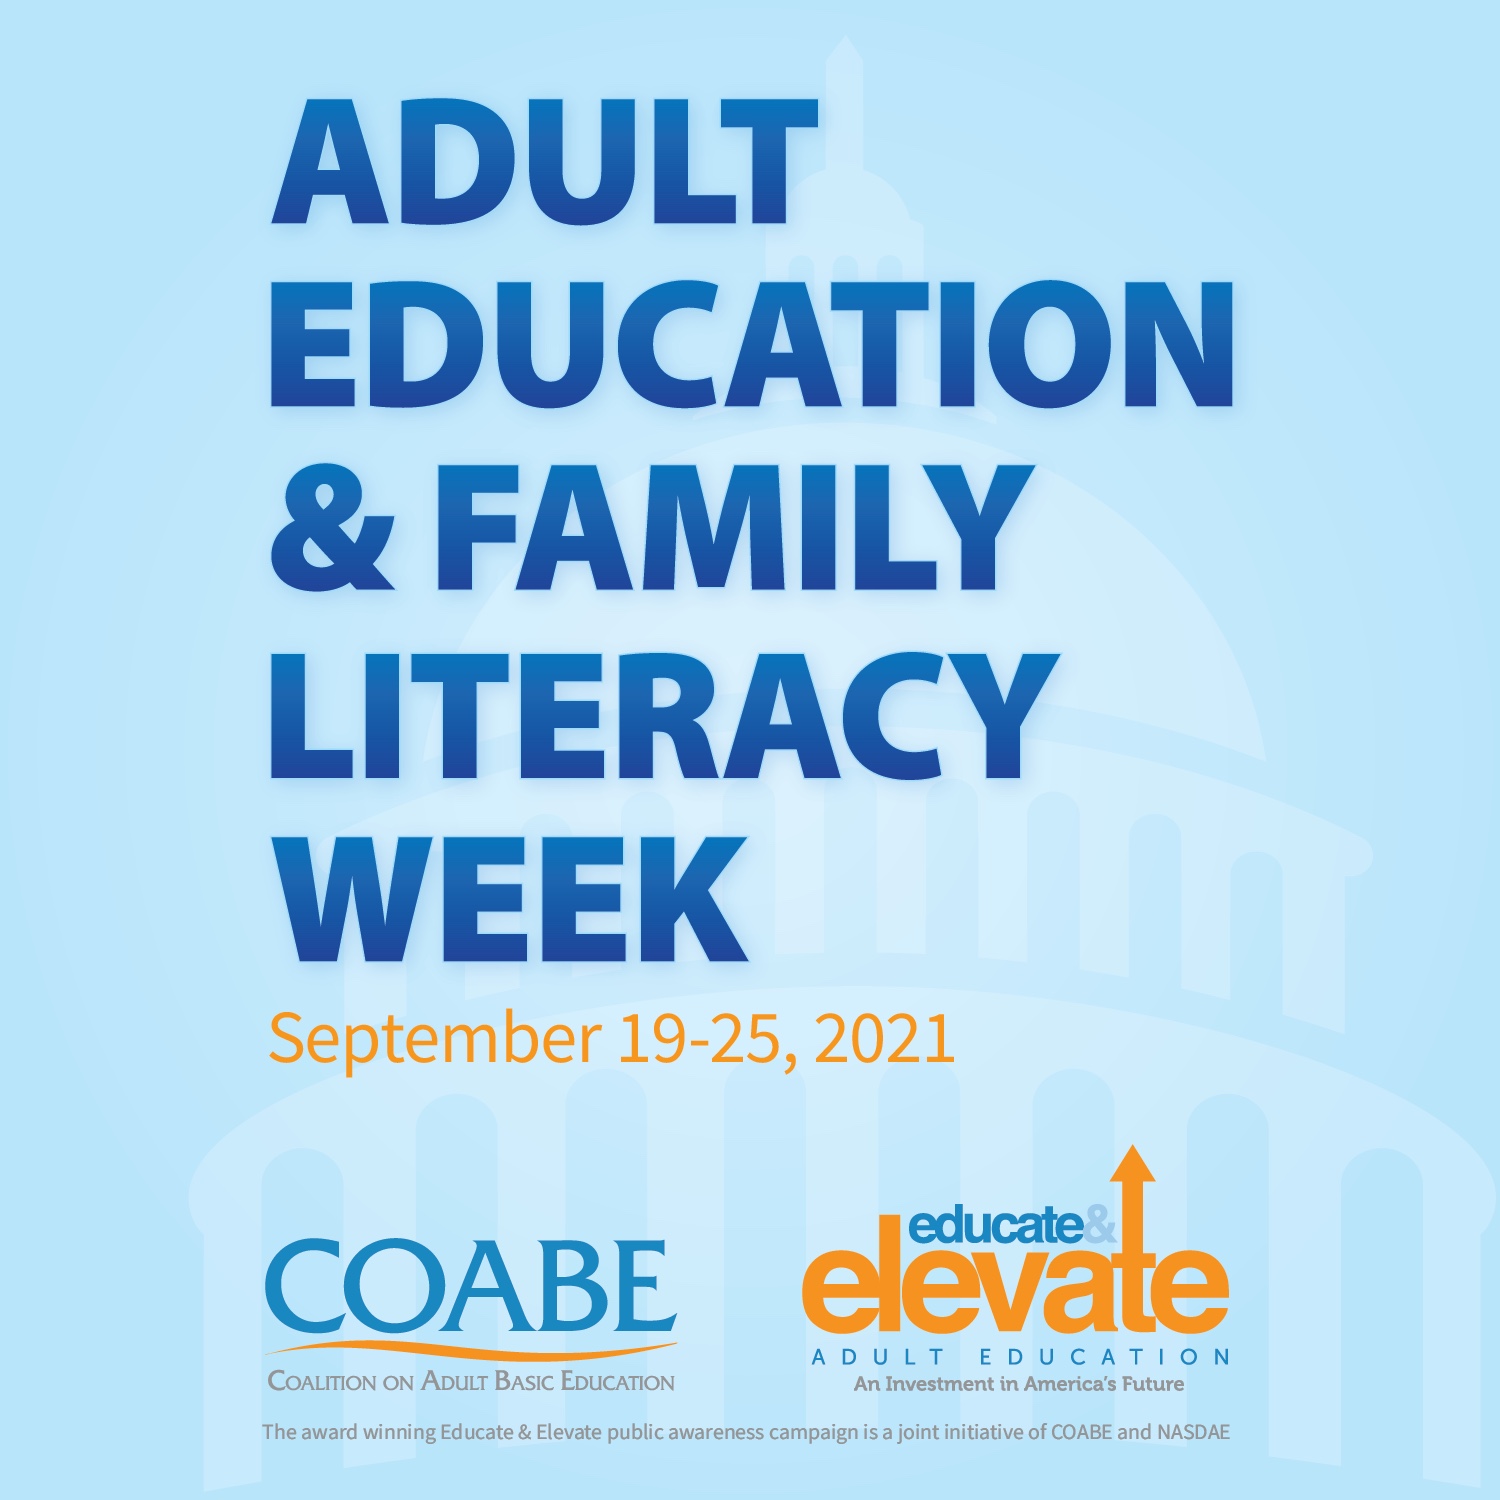 Adult Education & Family Literacy Week web banner